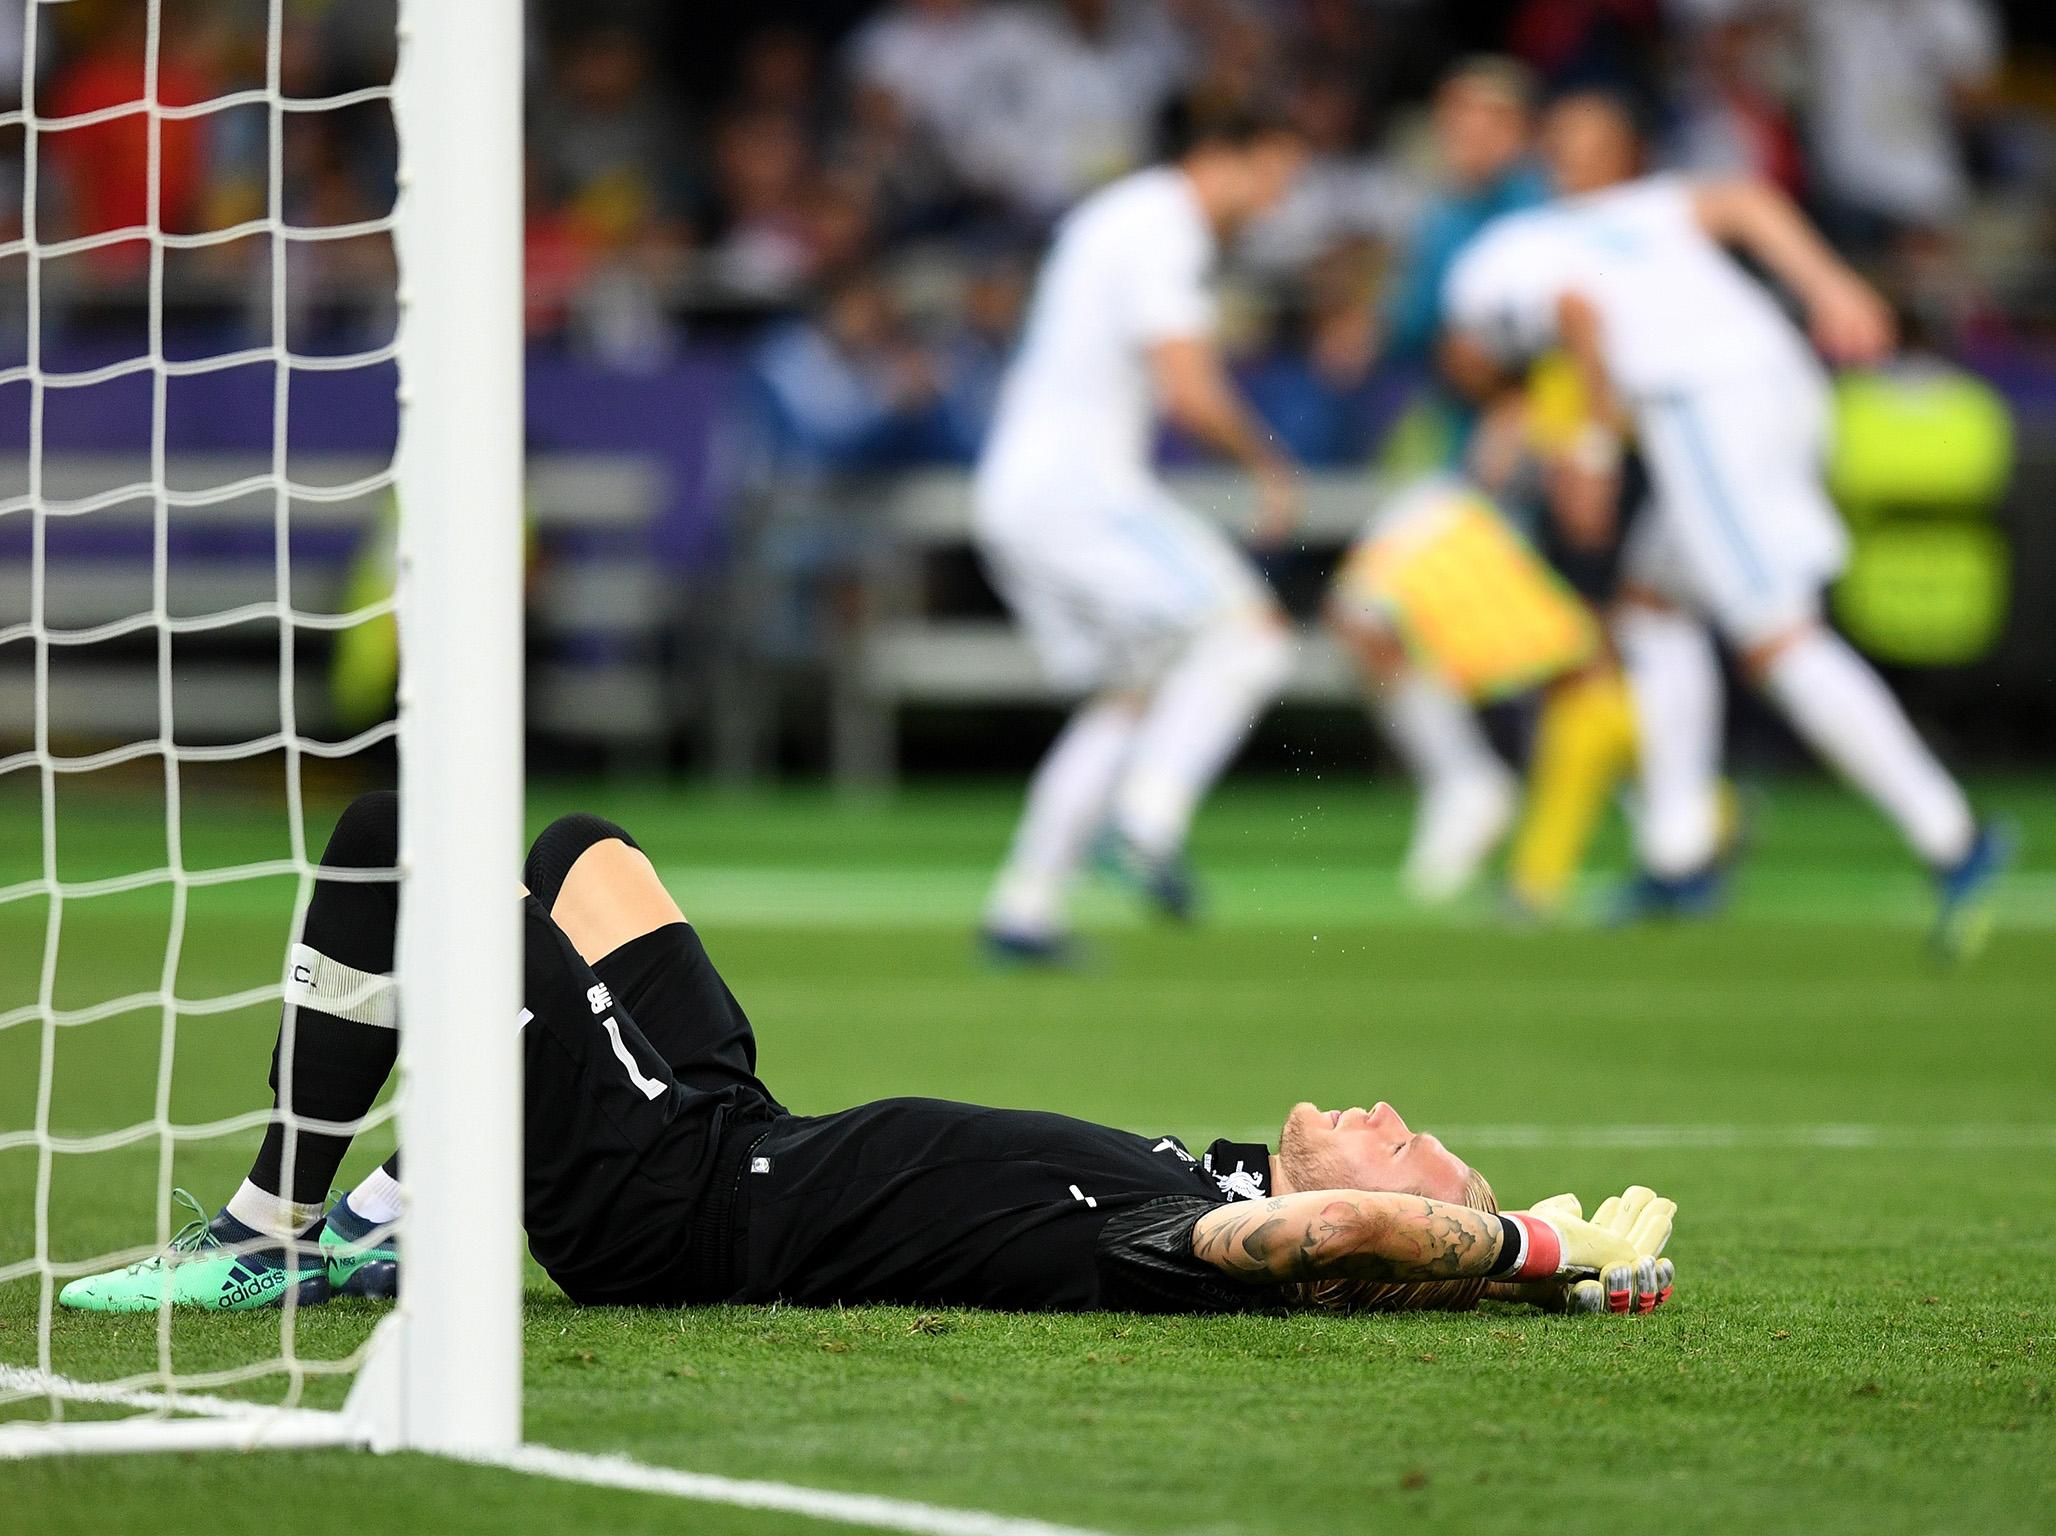 Liverpool&apos;s Loris Karius suffered concussion in Champions League final defeat to Real Madrid, says doctor